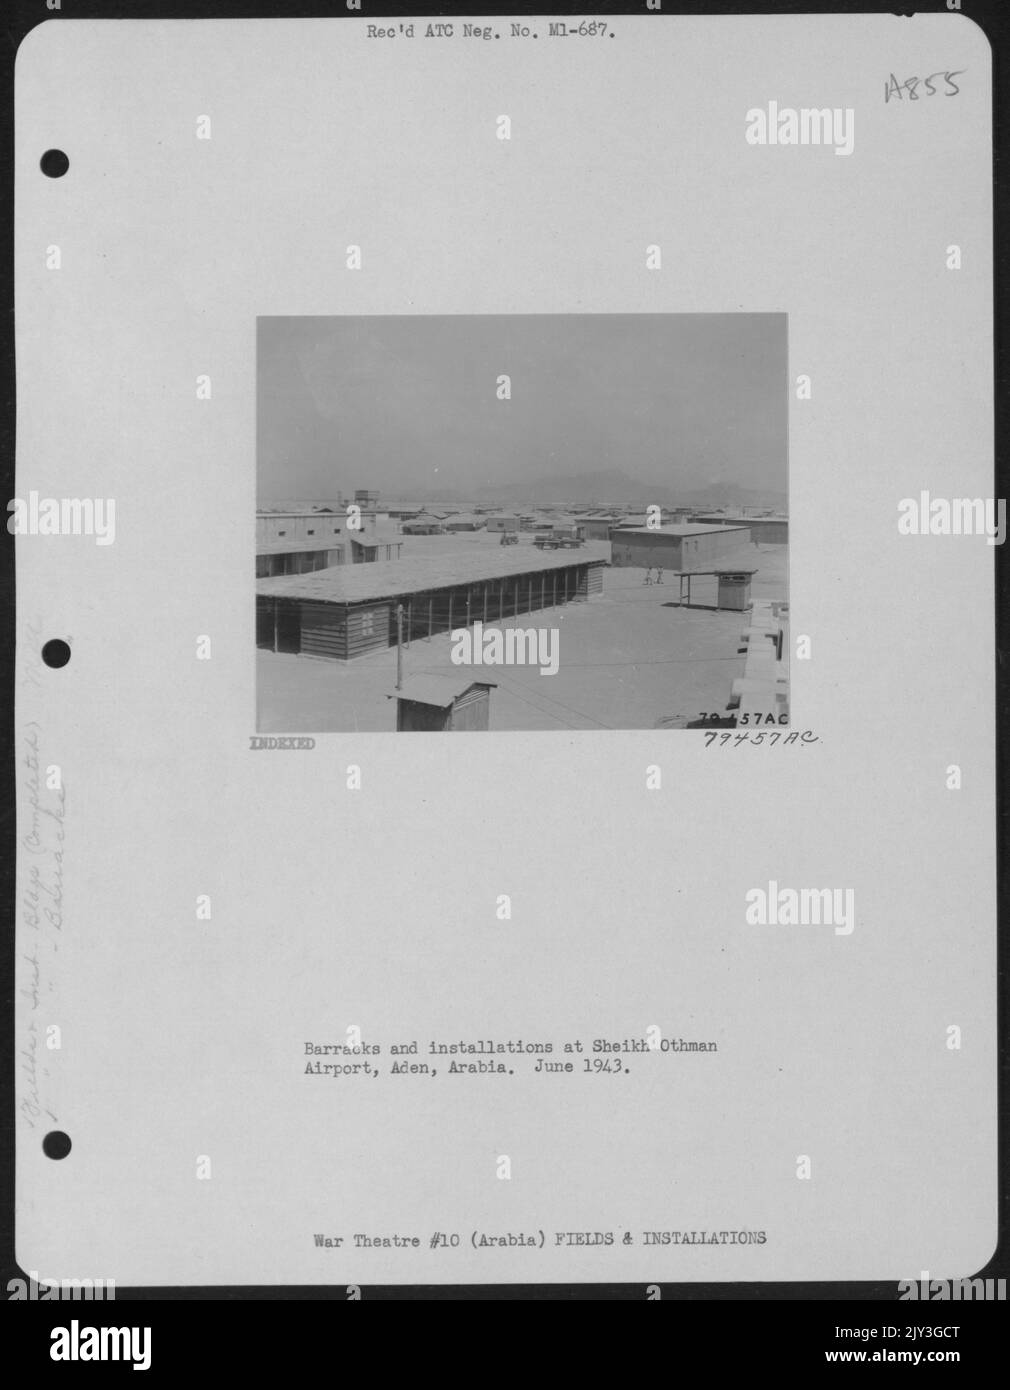 Barracks And Installations At Sheikh Othman Airport, Aden, Arabia. June 1943. Stock Photo